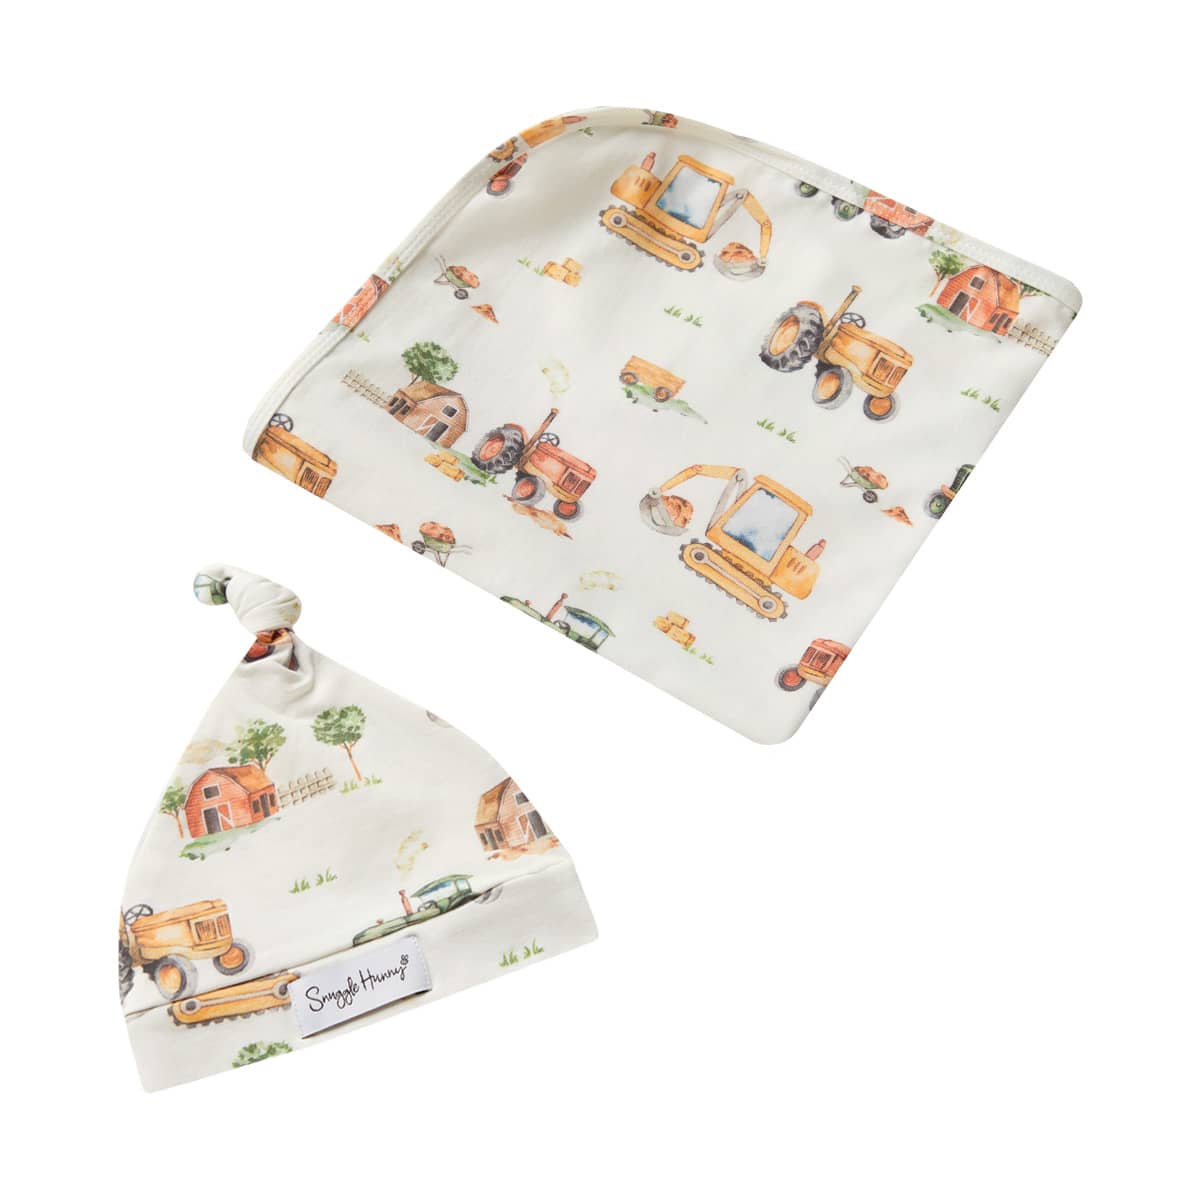 Snuggle Hunny Jersey Wrap with Matching Headwear - Diggers & Tractors Organic